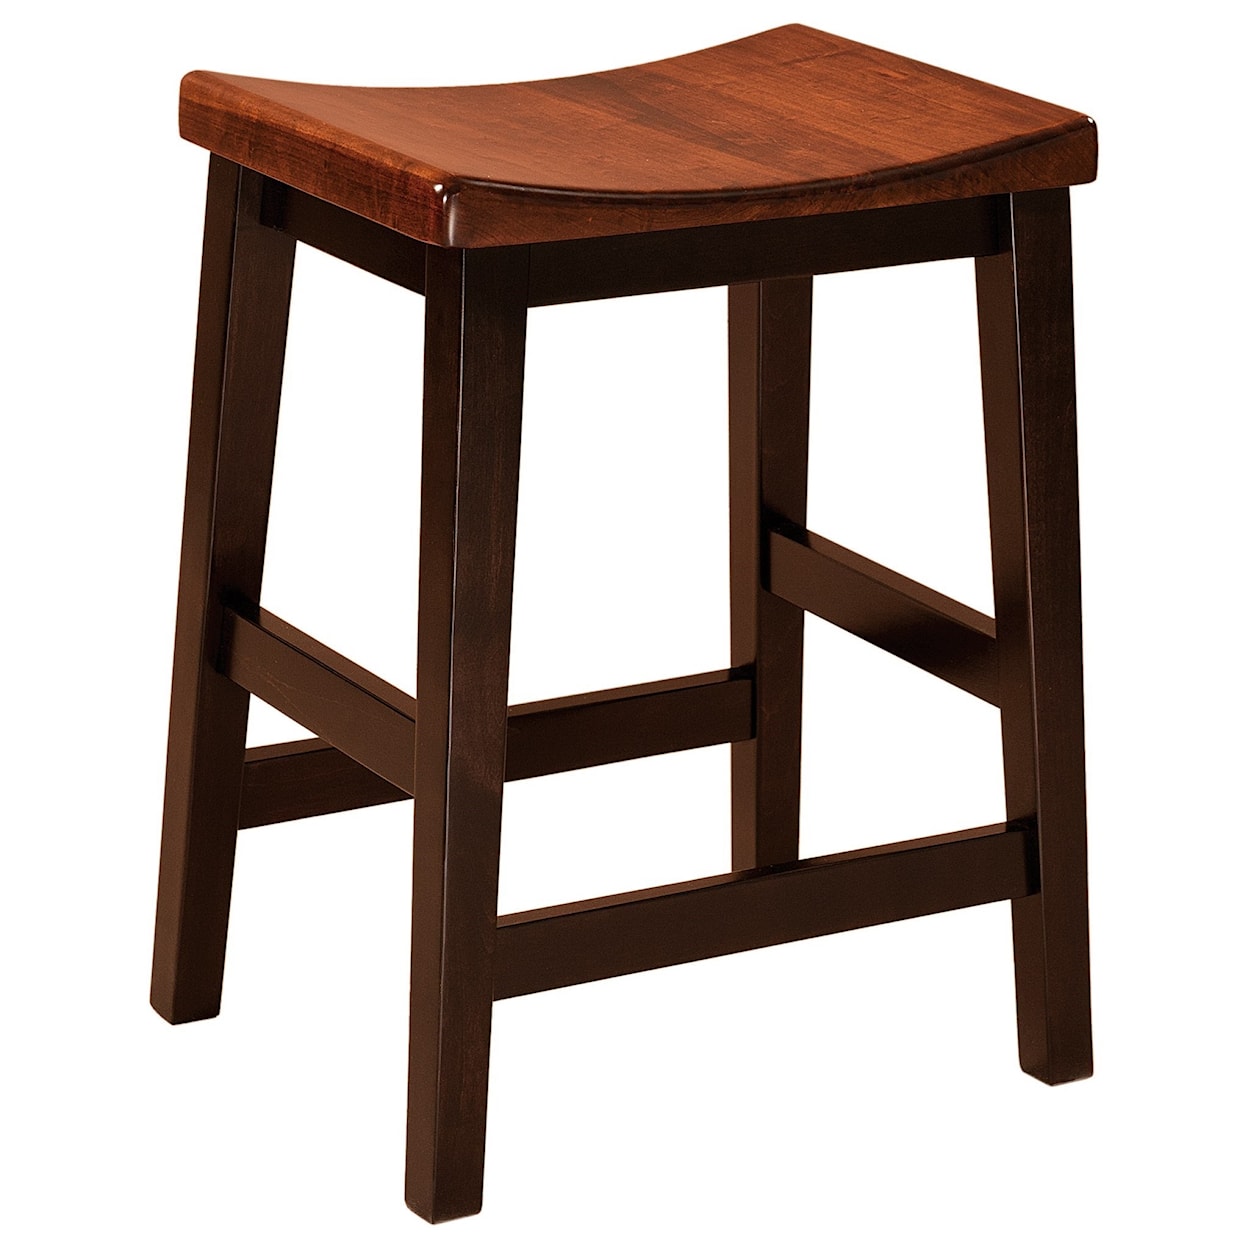 F&N Woodworking Coby Bar Stool 30" Height - Wood Seat